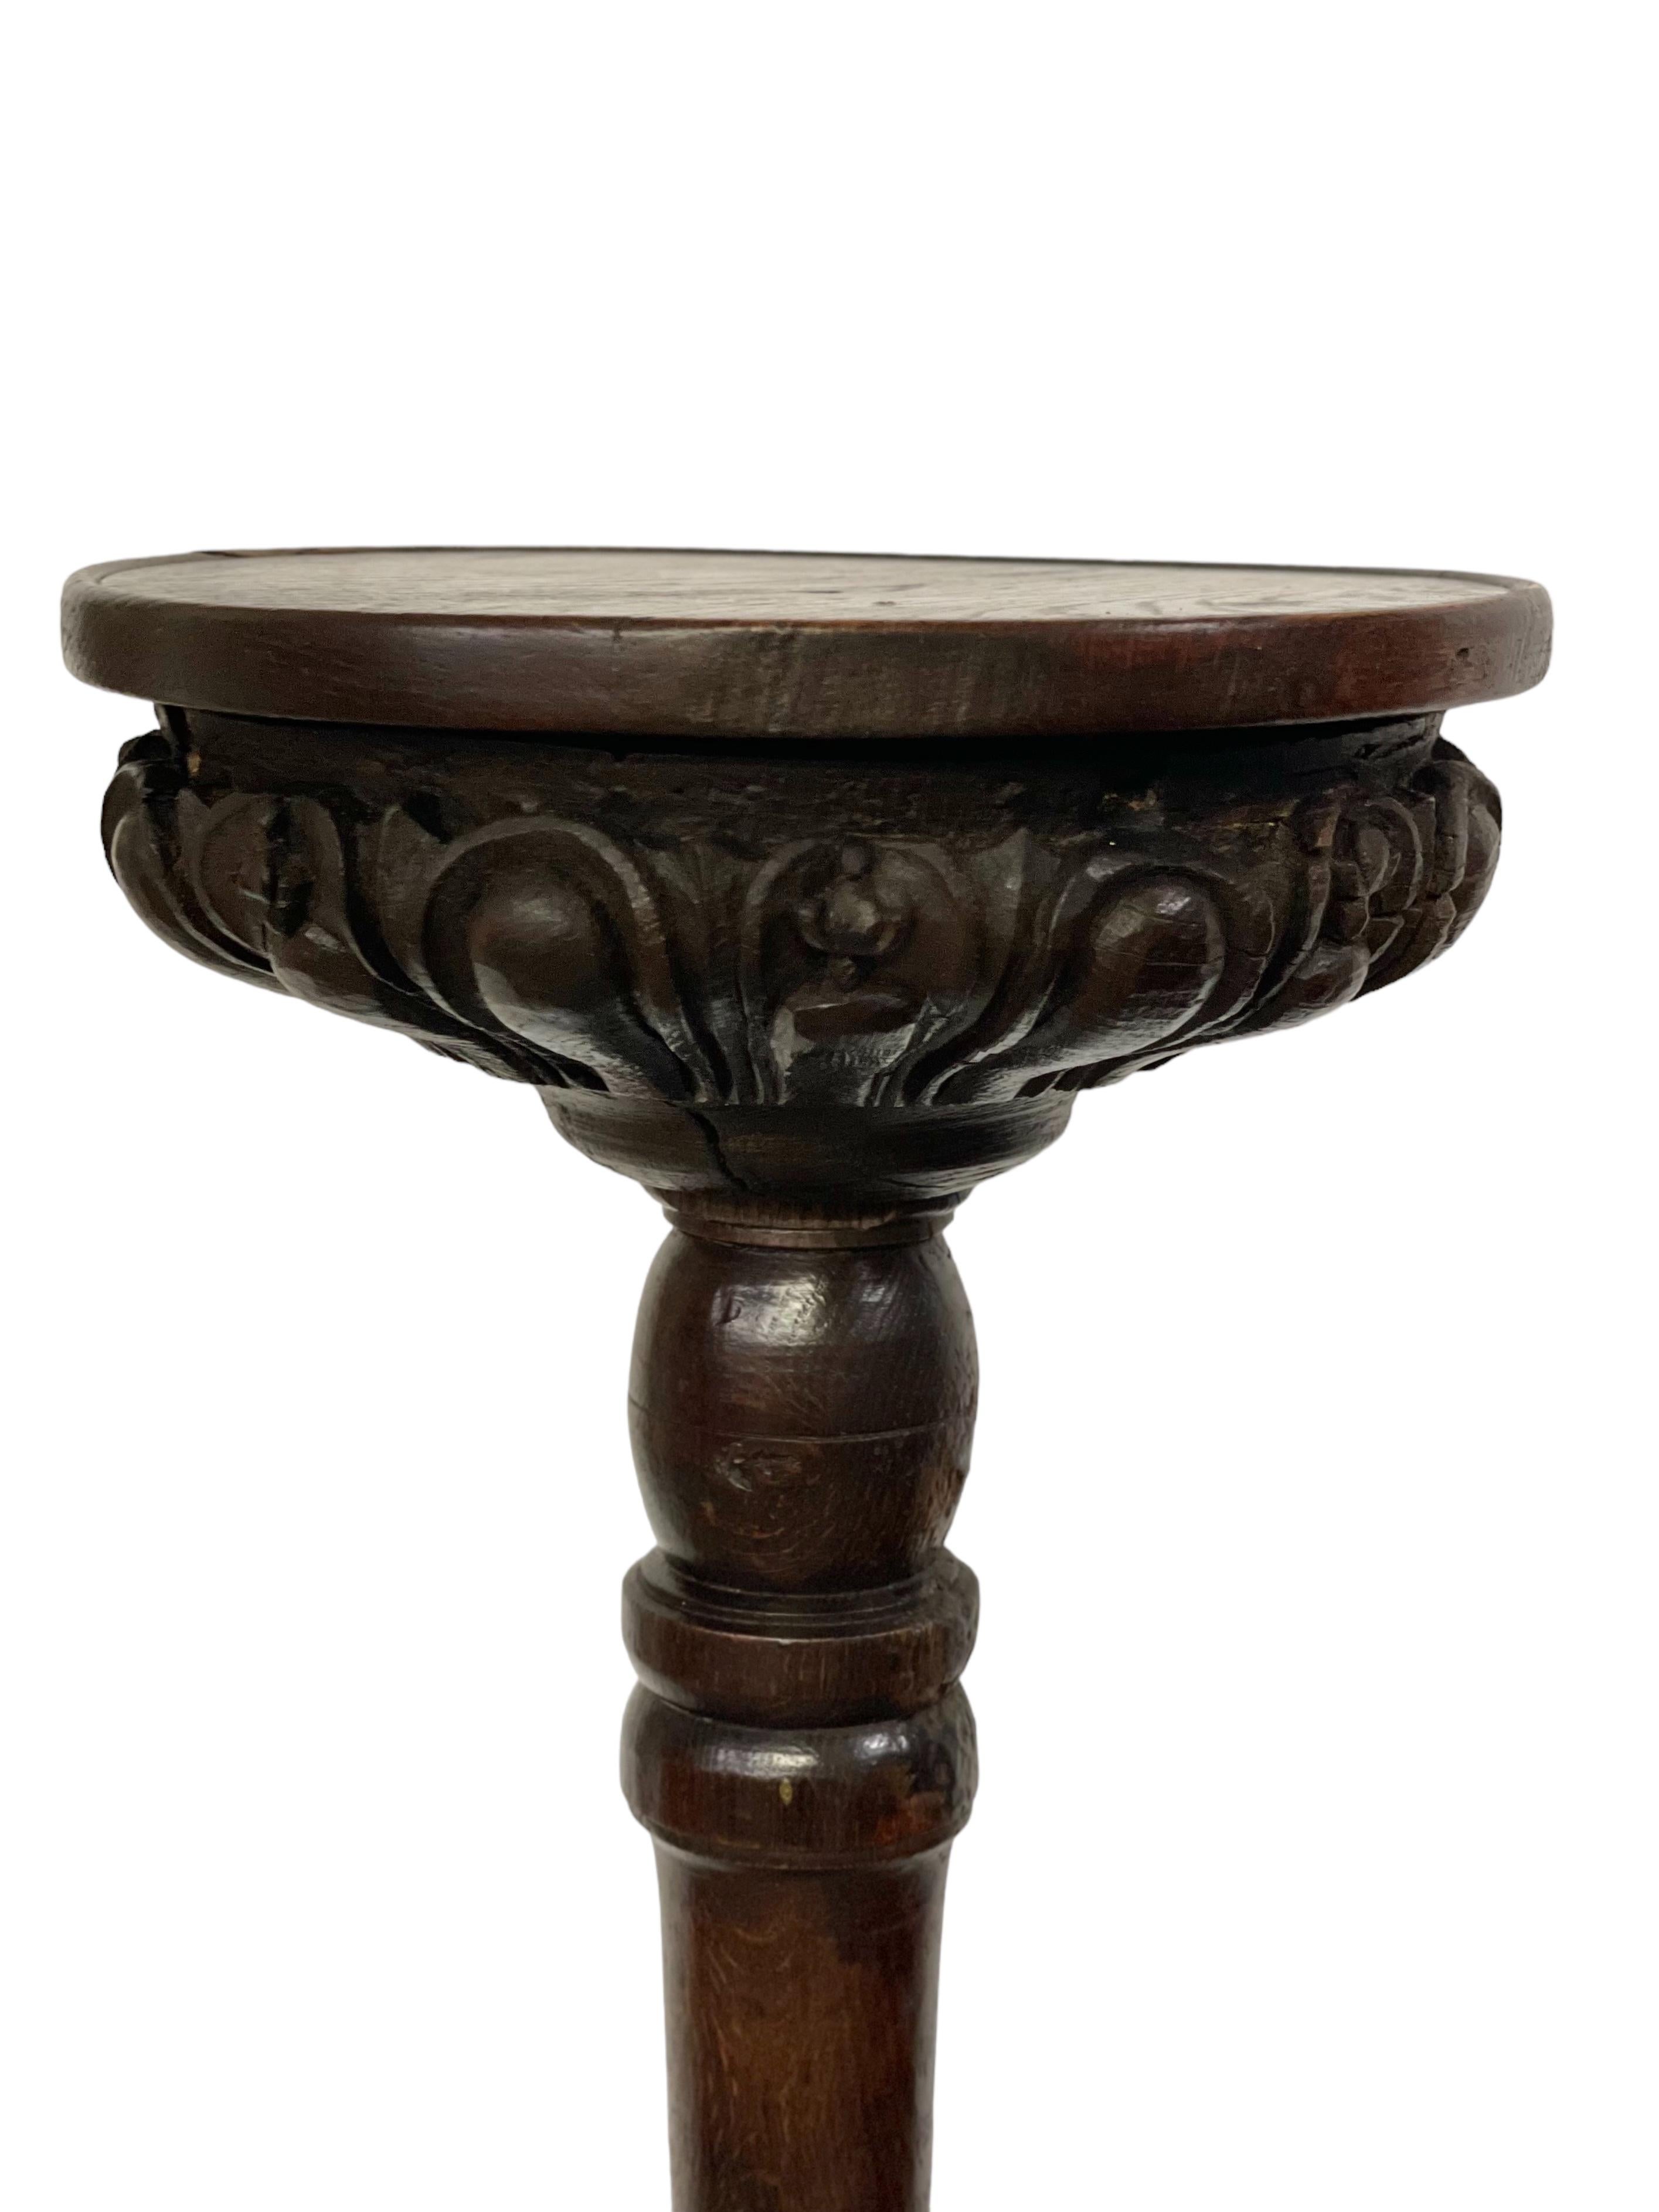 17th Century French Torchère, or Pedestal For Sale 11